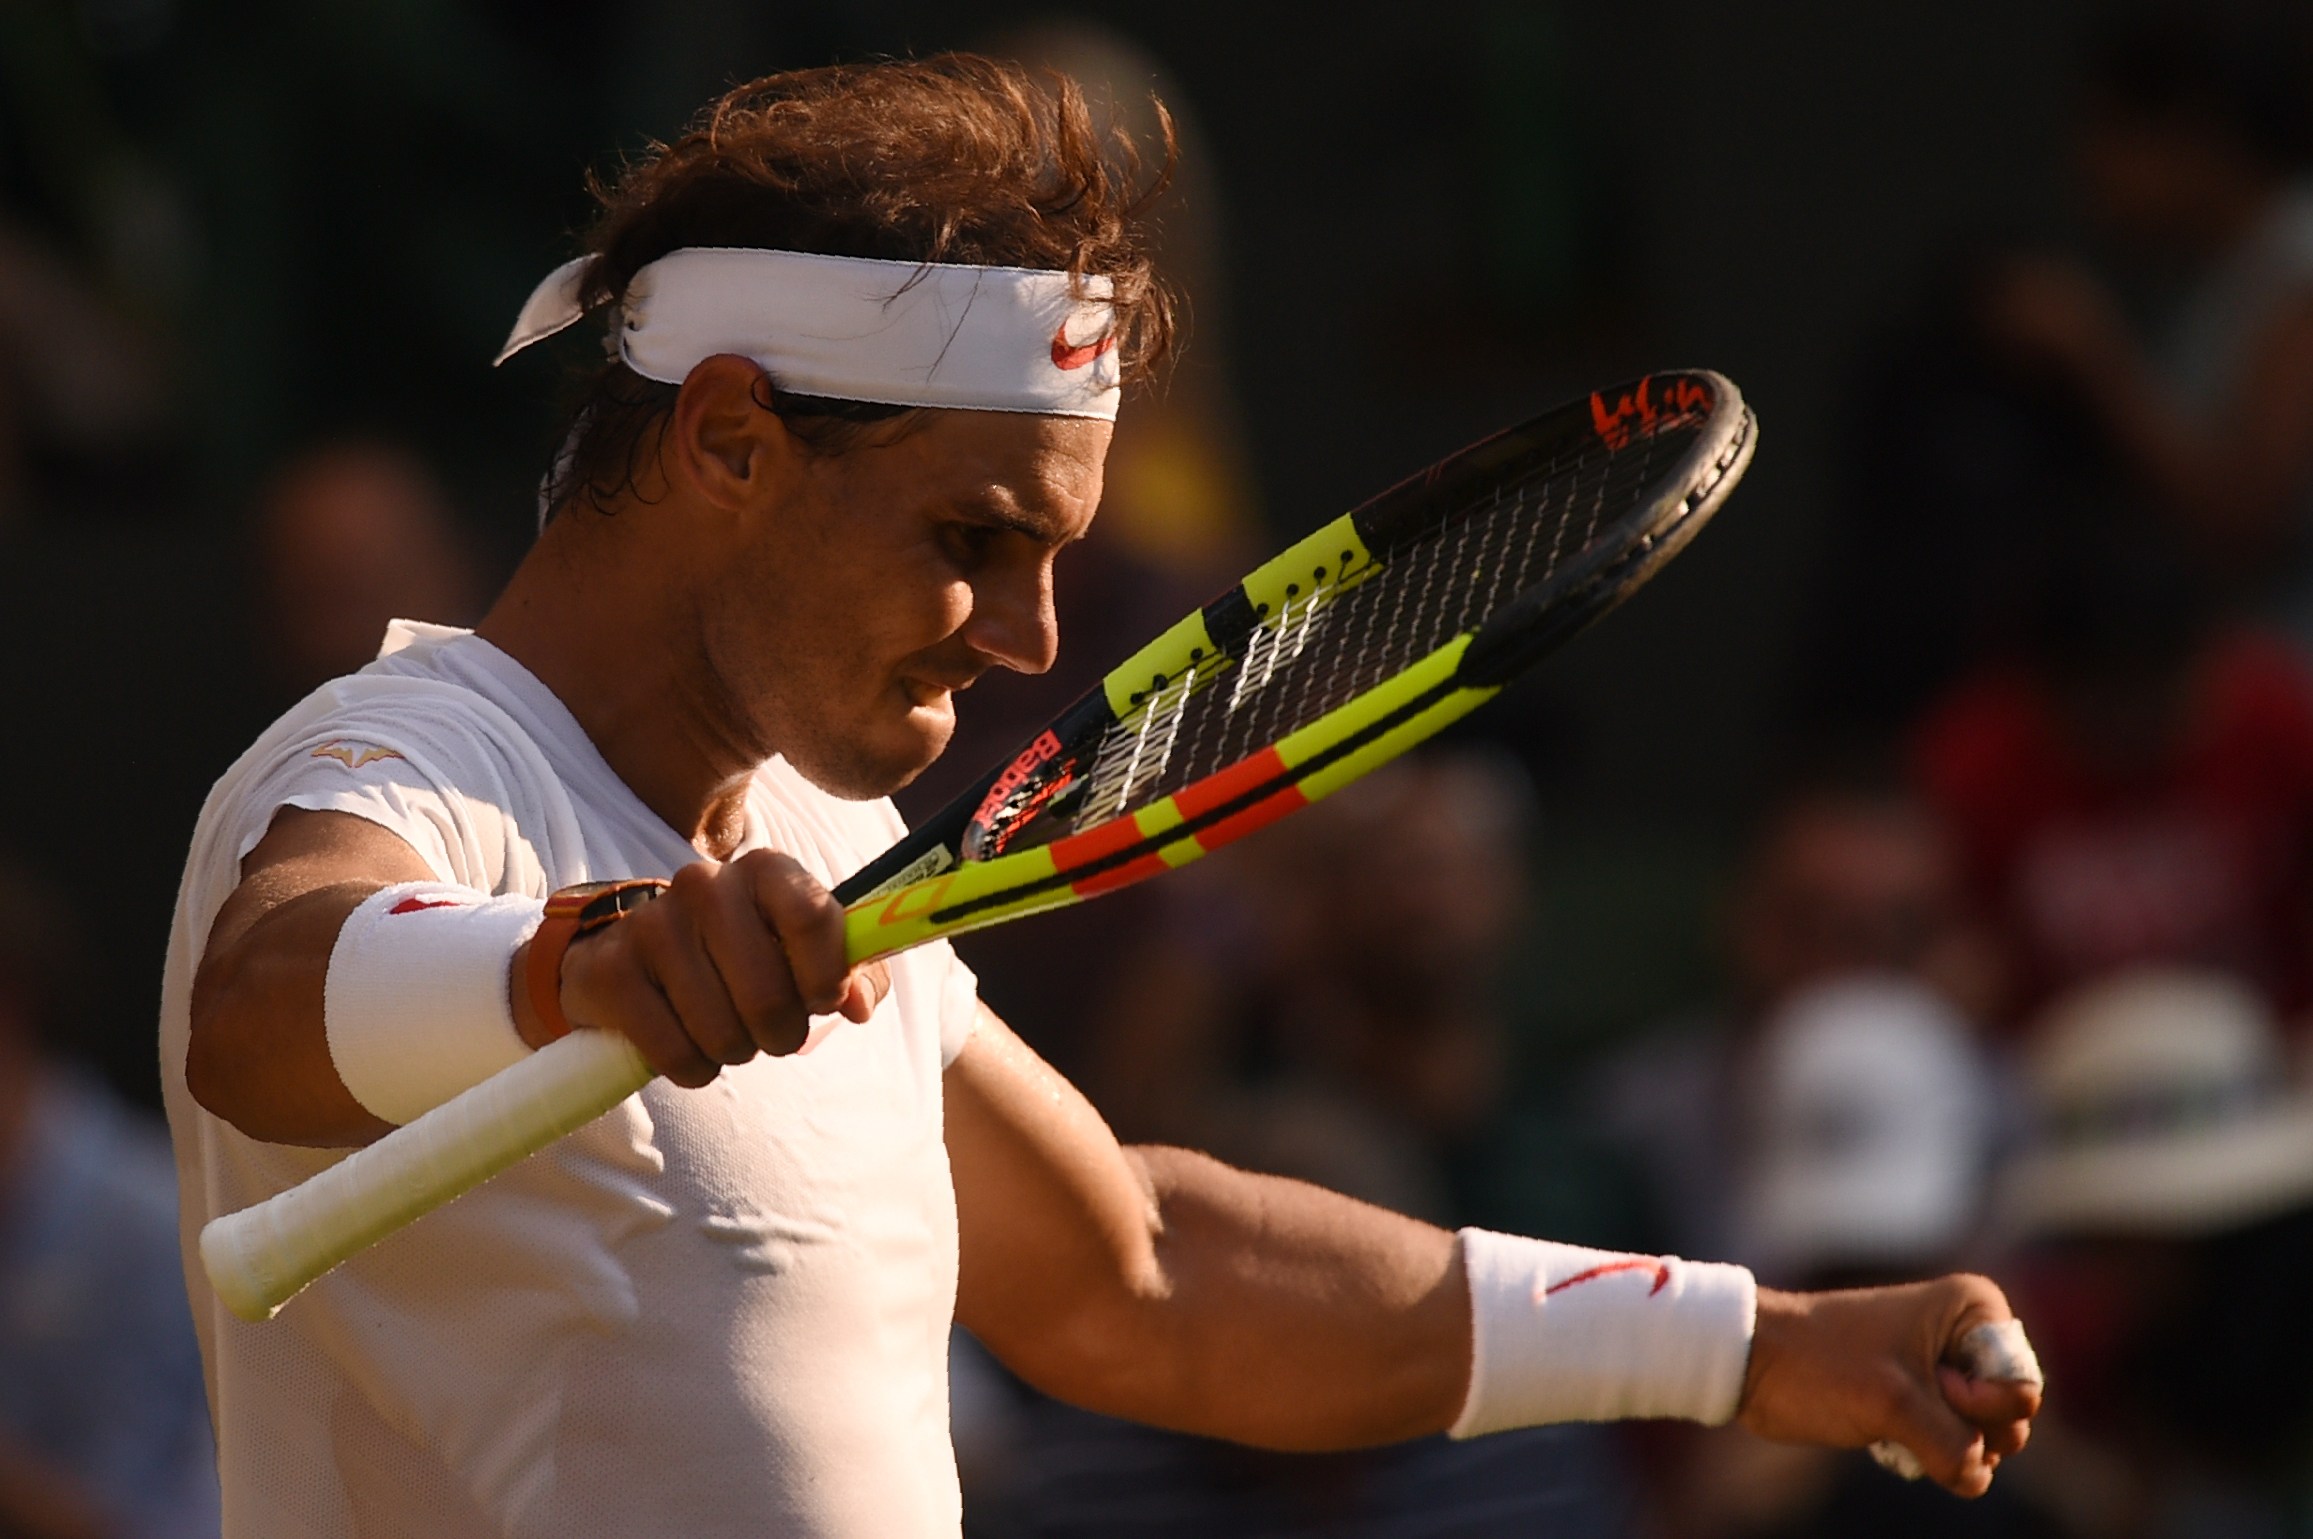 With efficient aggression, Rafa reaches first Wimbledon QF since 2011